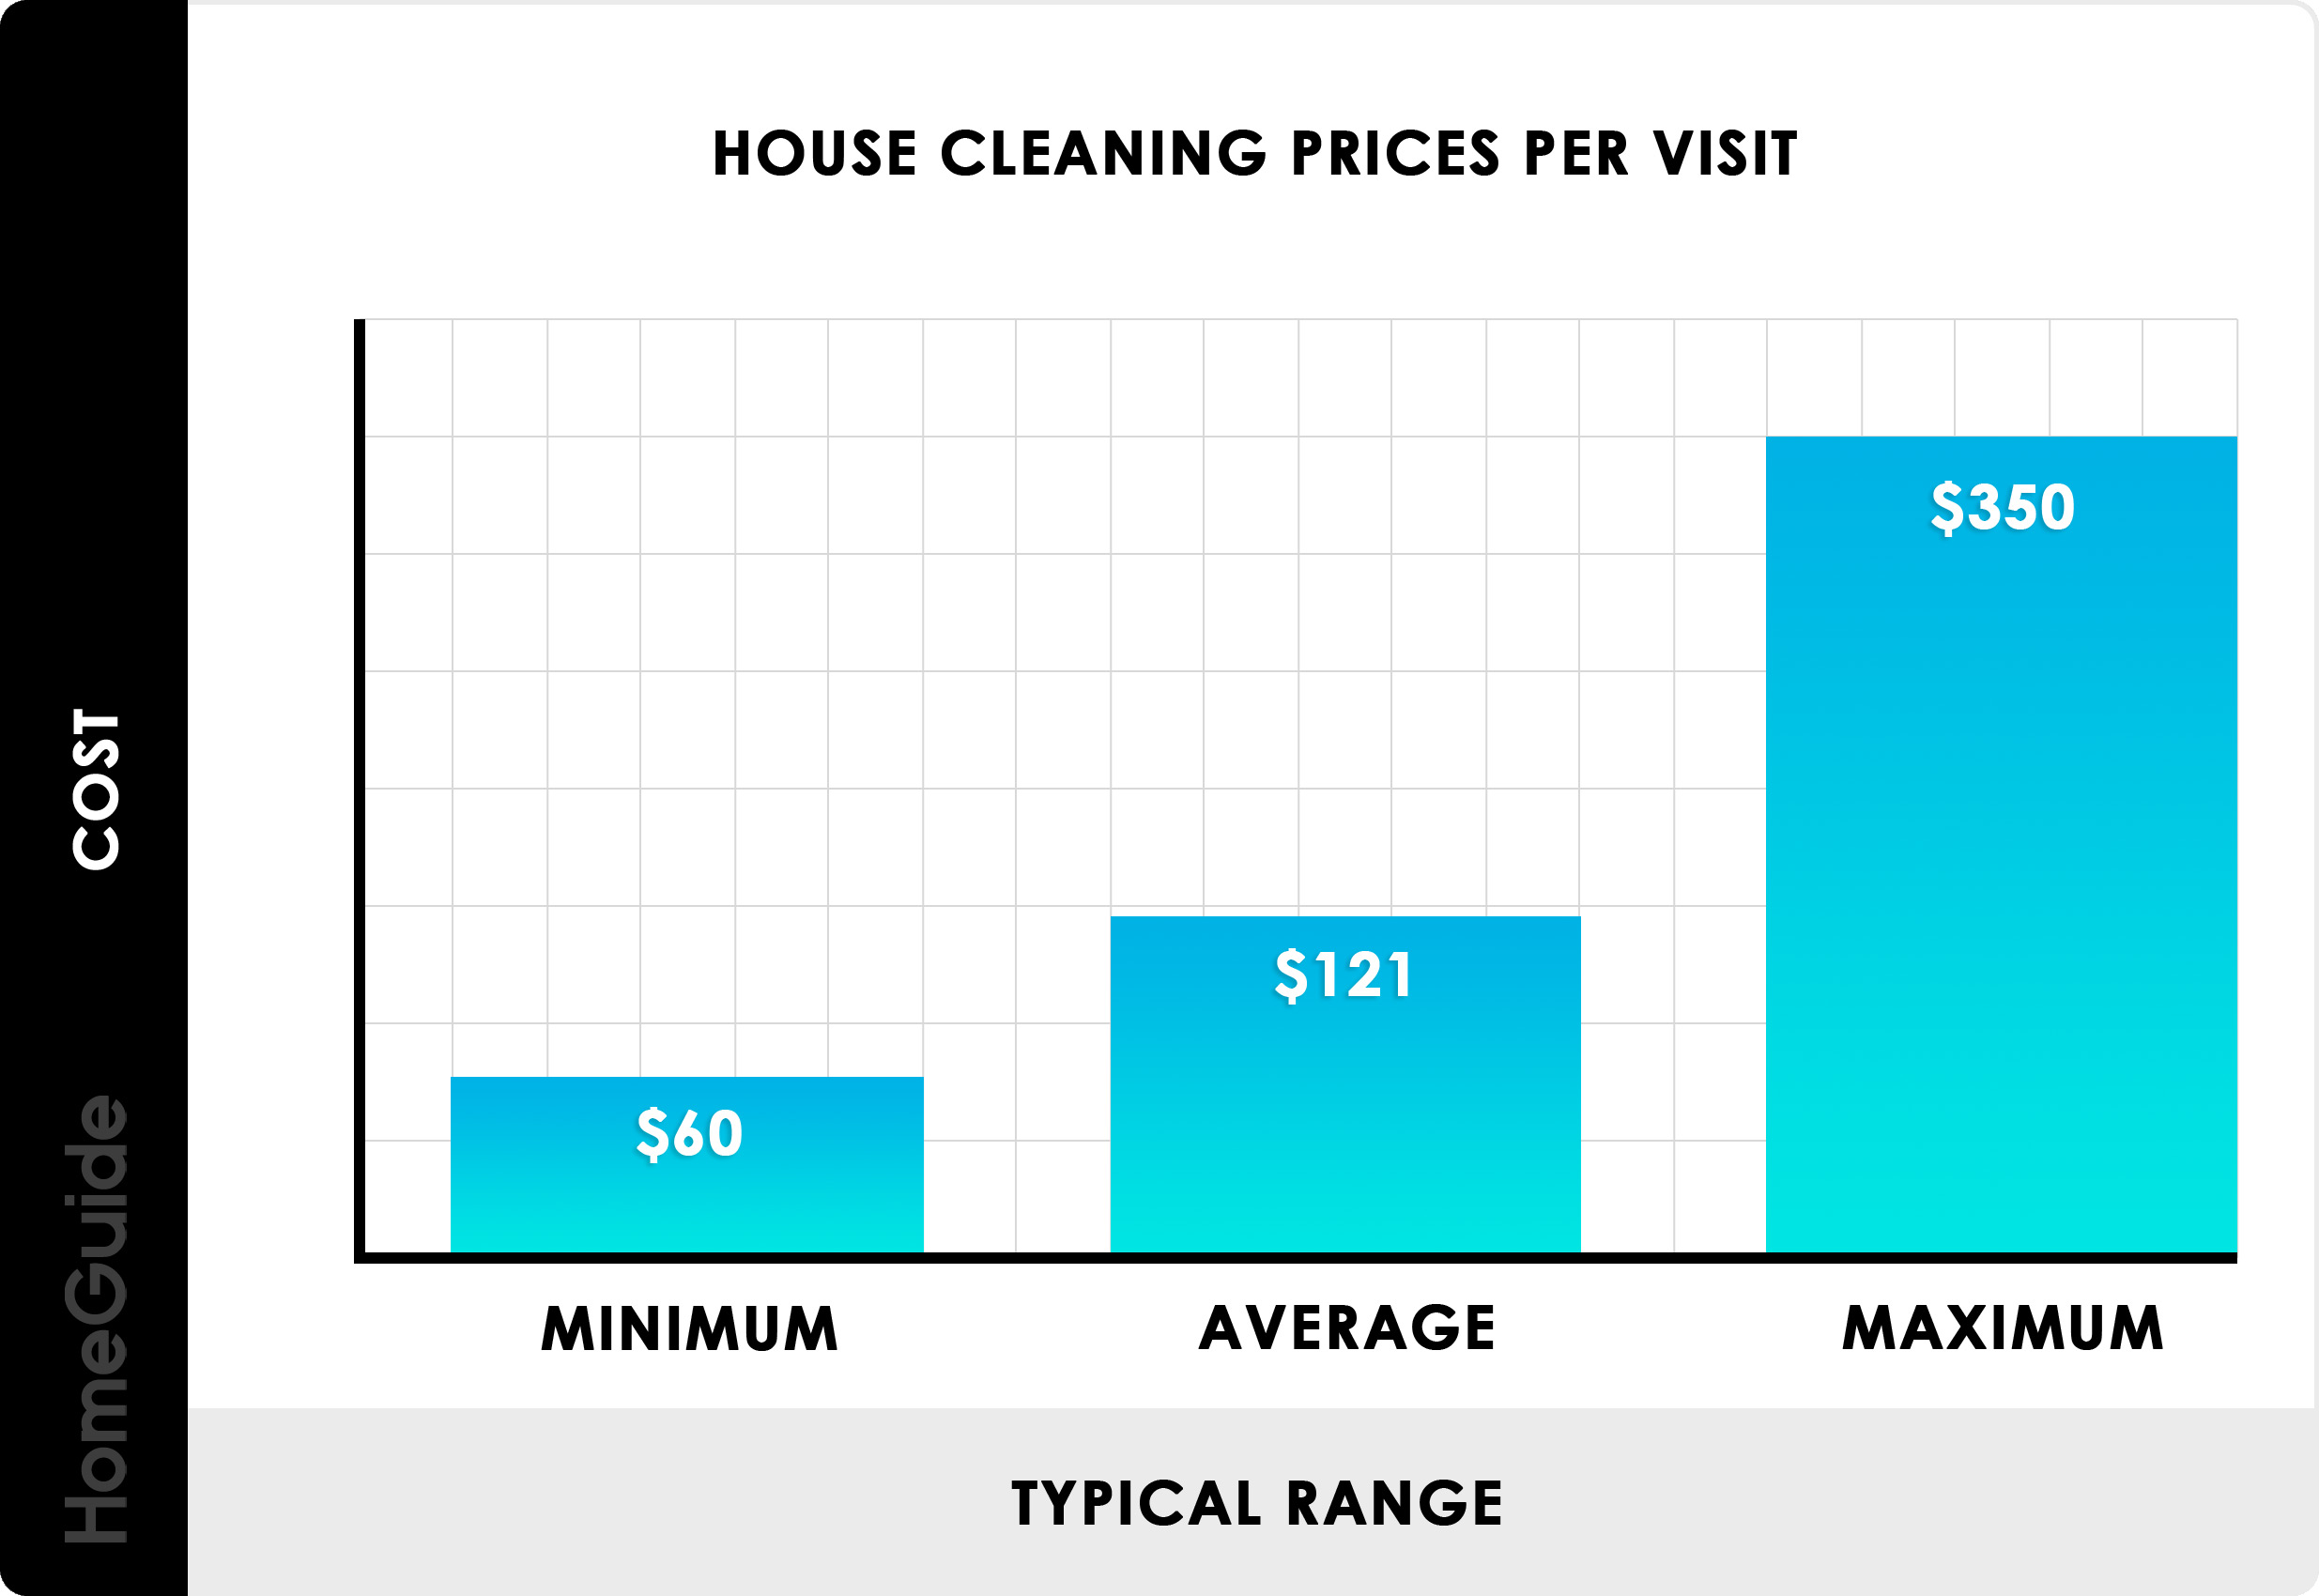 Average home cleaning prices in the United States range from approximately $60-$350